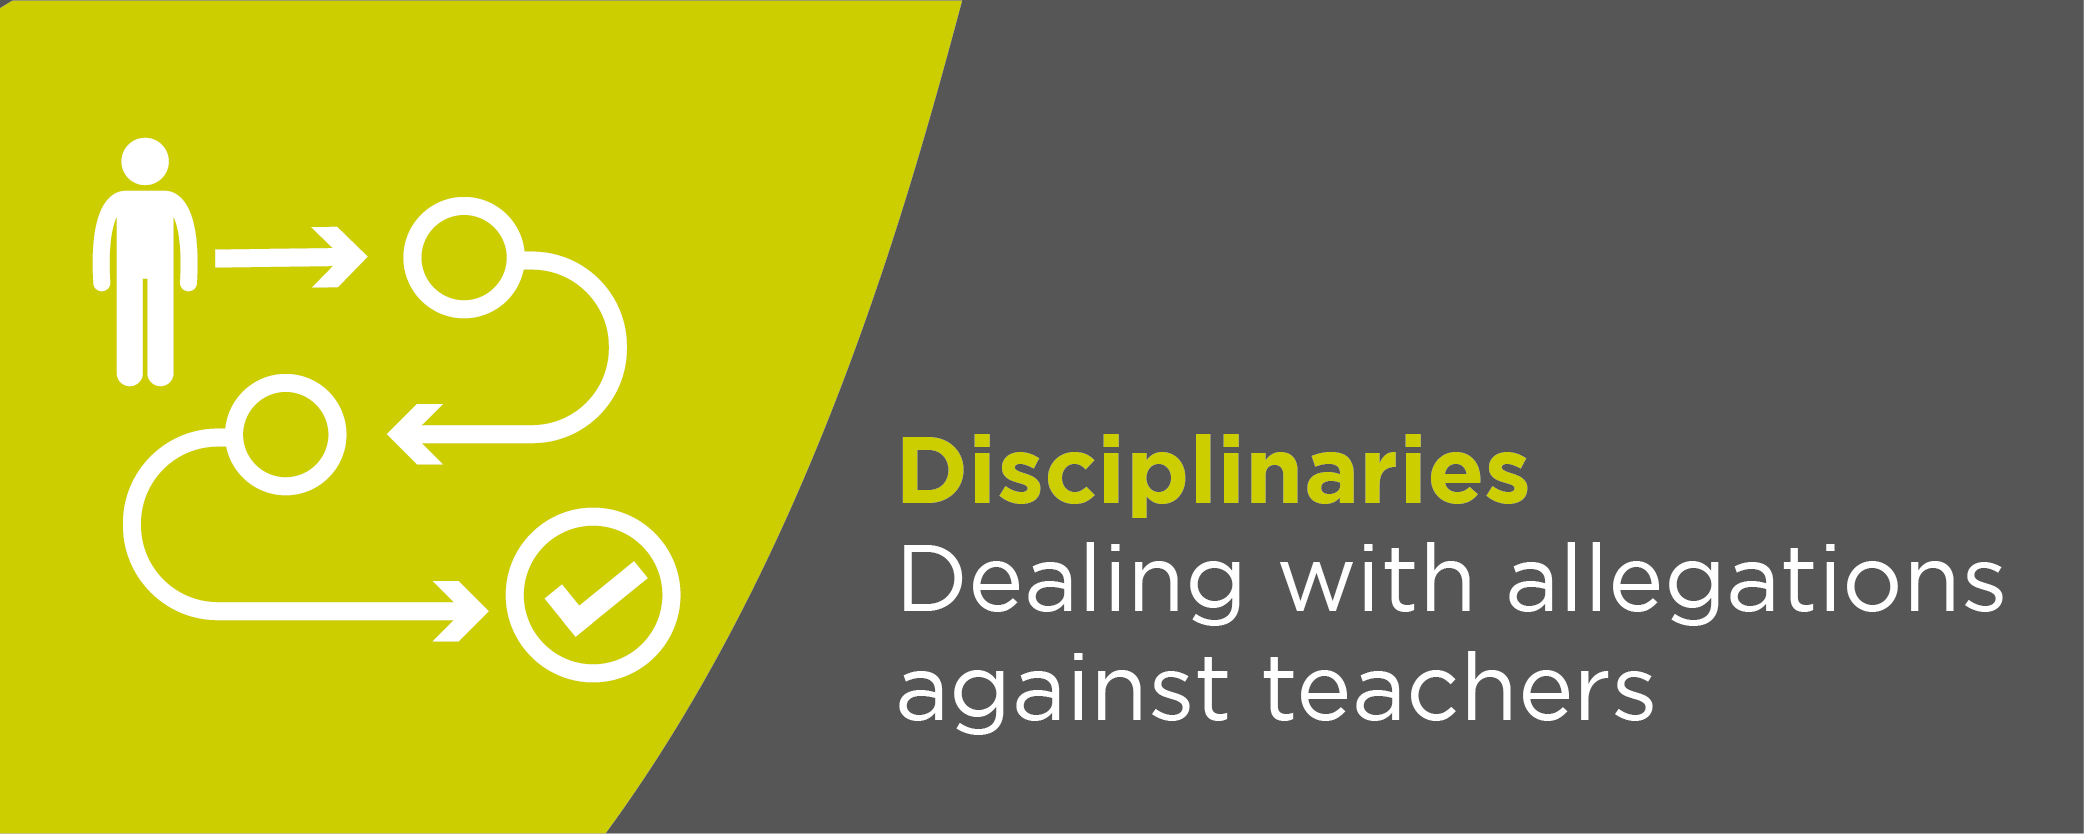 Disciplinaries: Dealing with allegations against teachers